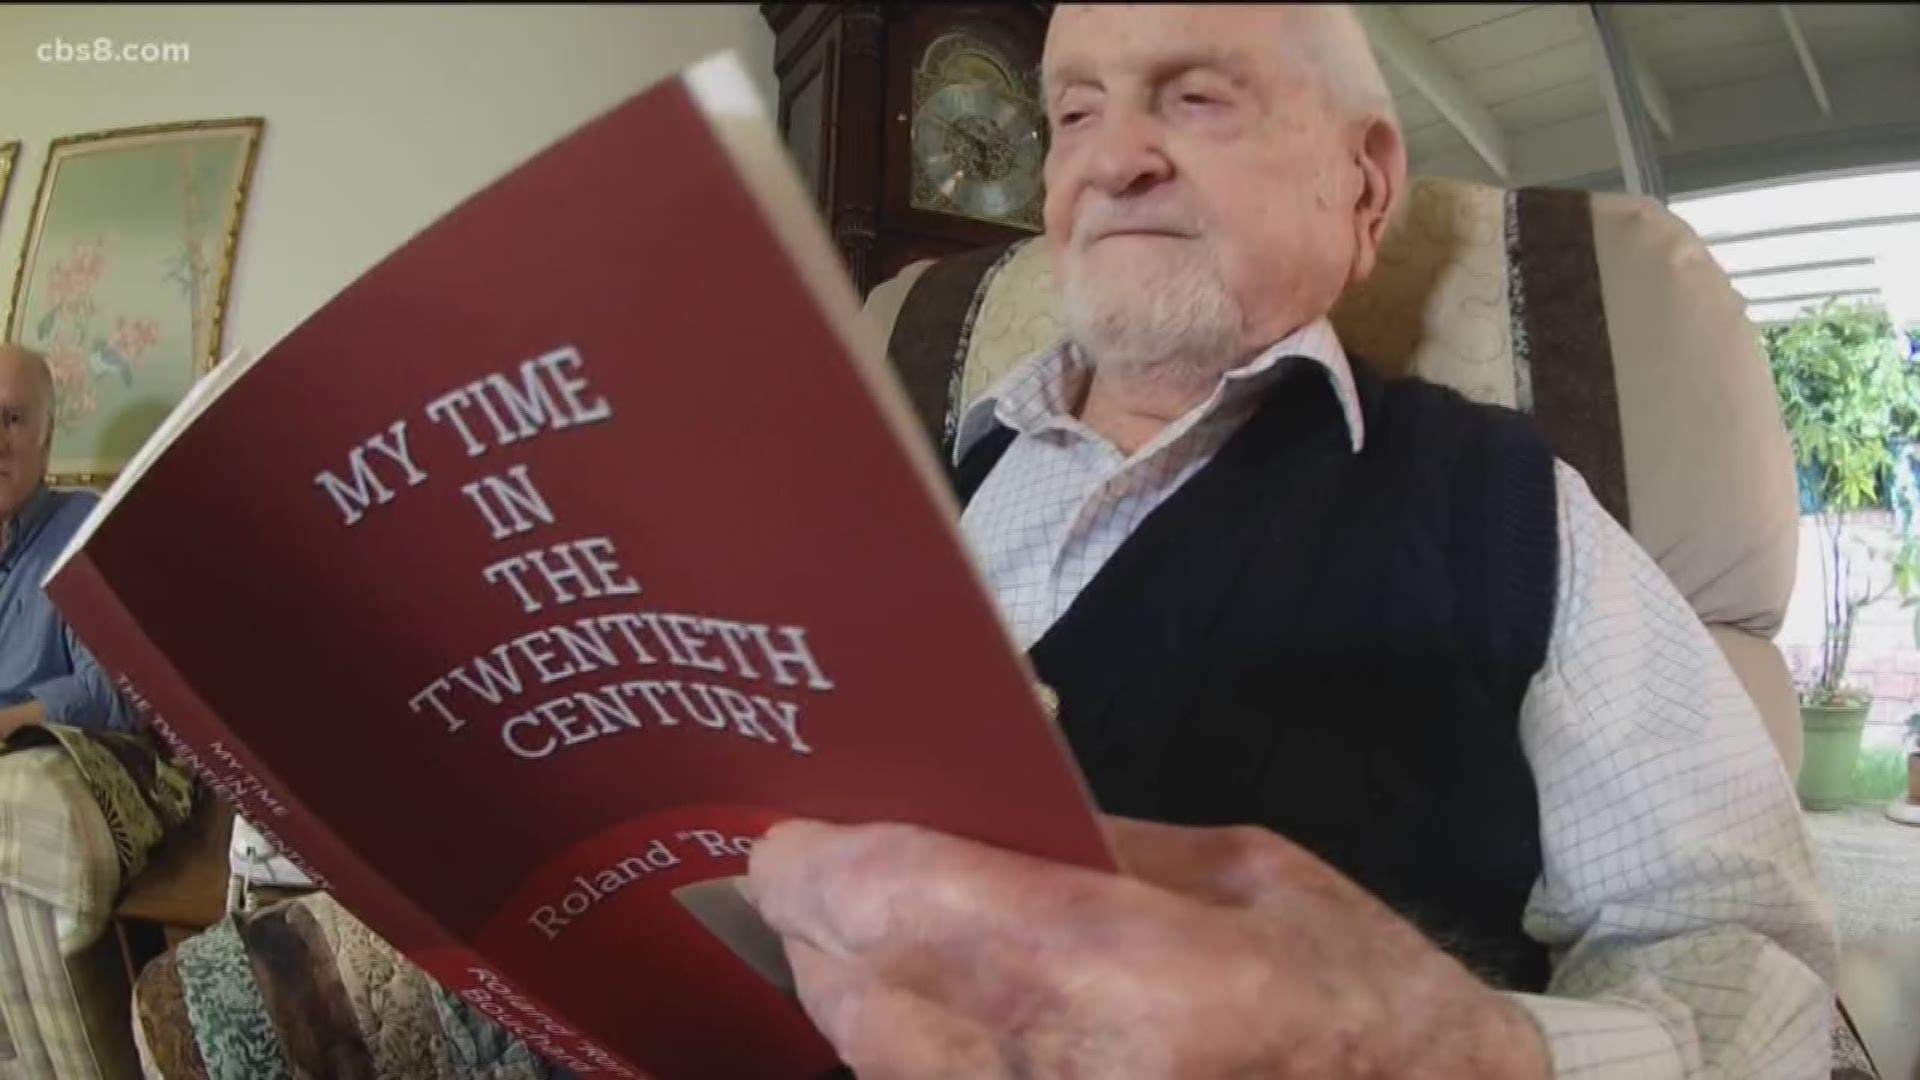 Ron Bouchard's new book is called "My Time in the Twentieth Century" and Ron told us his secret to a long life.